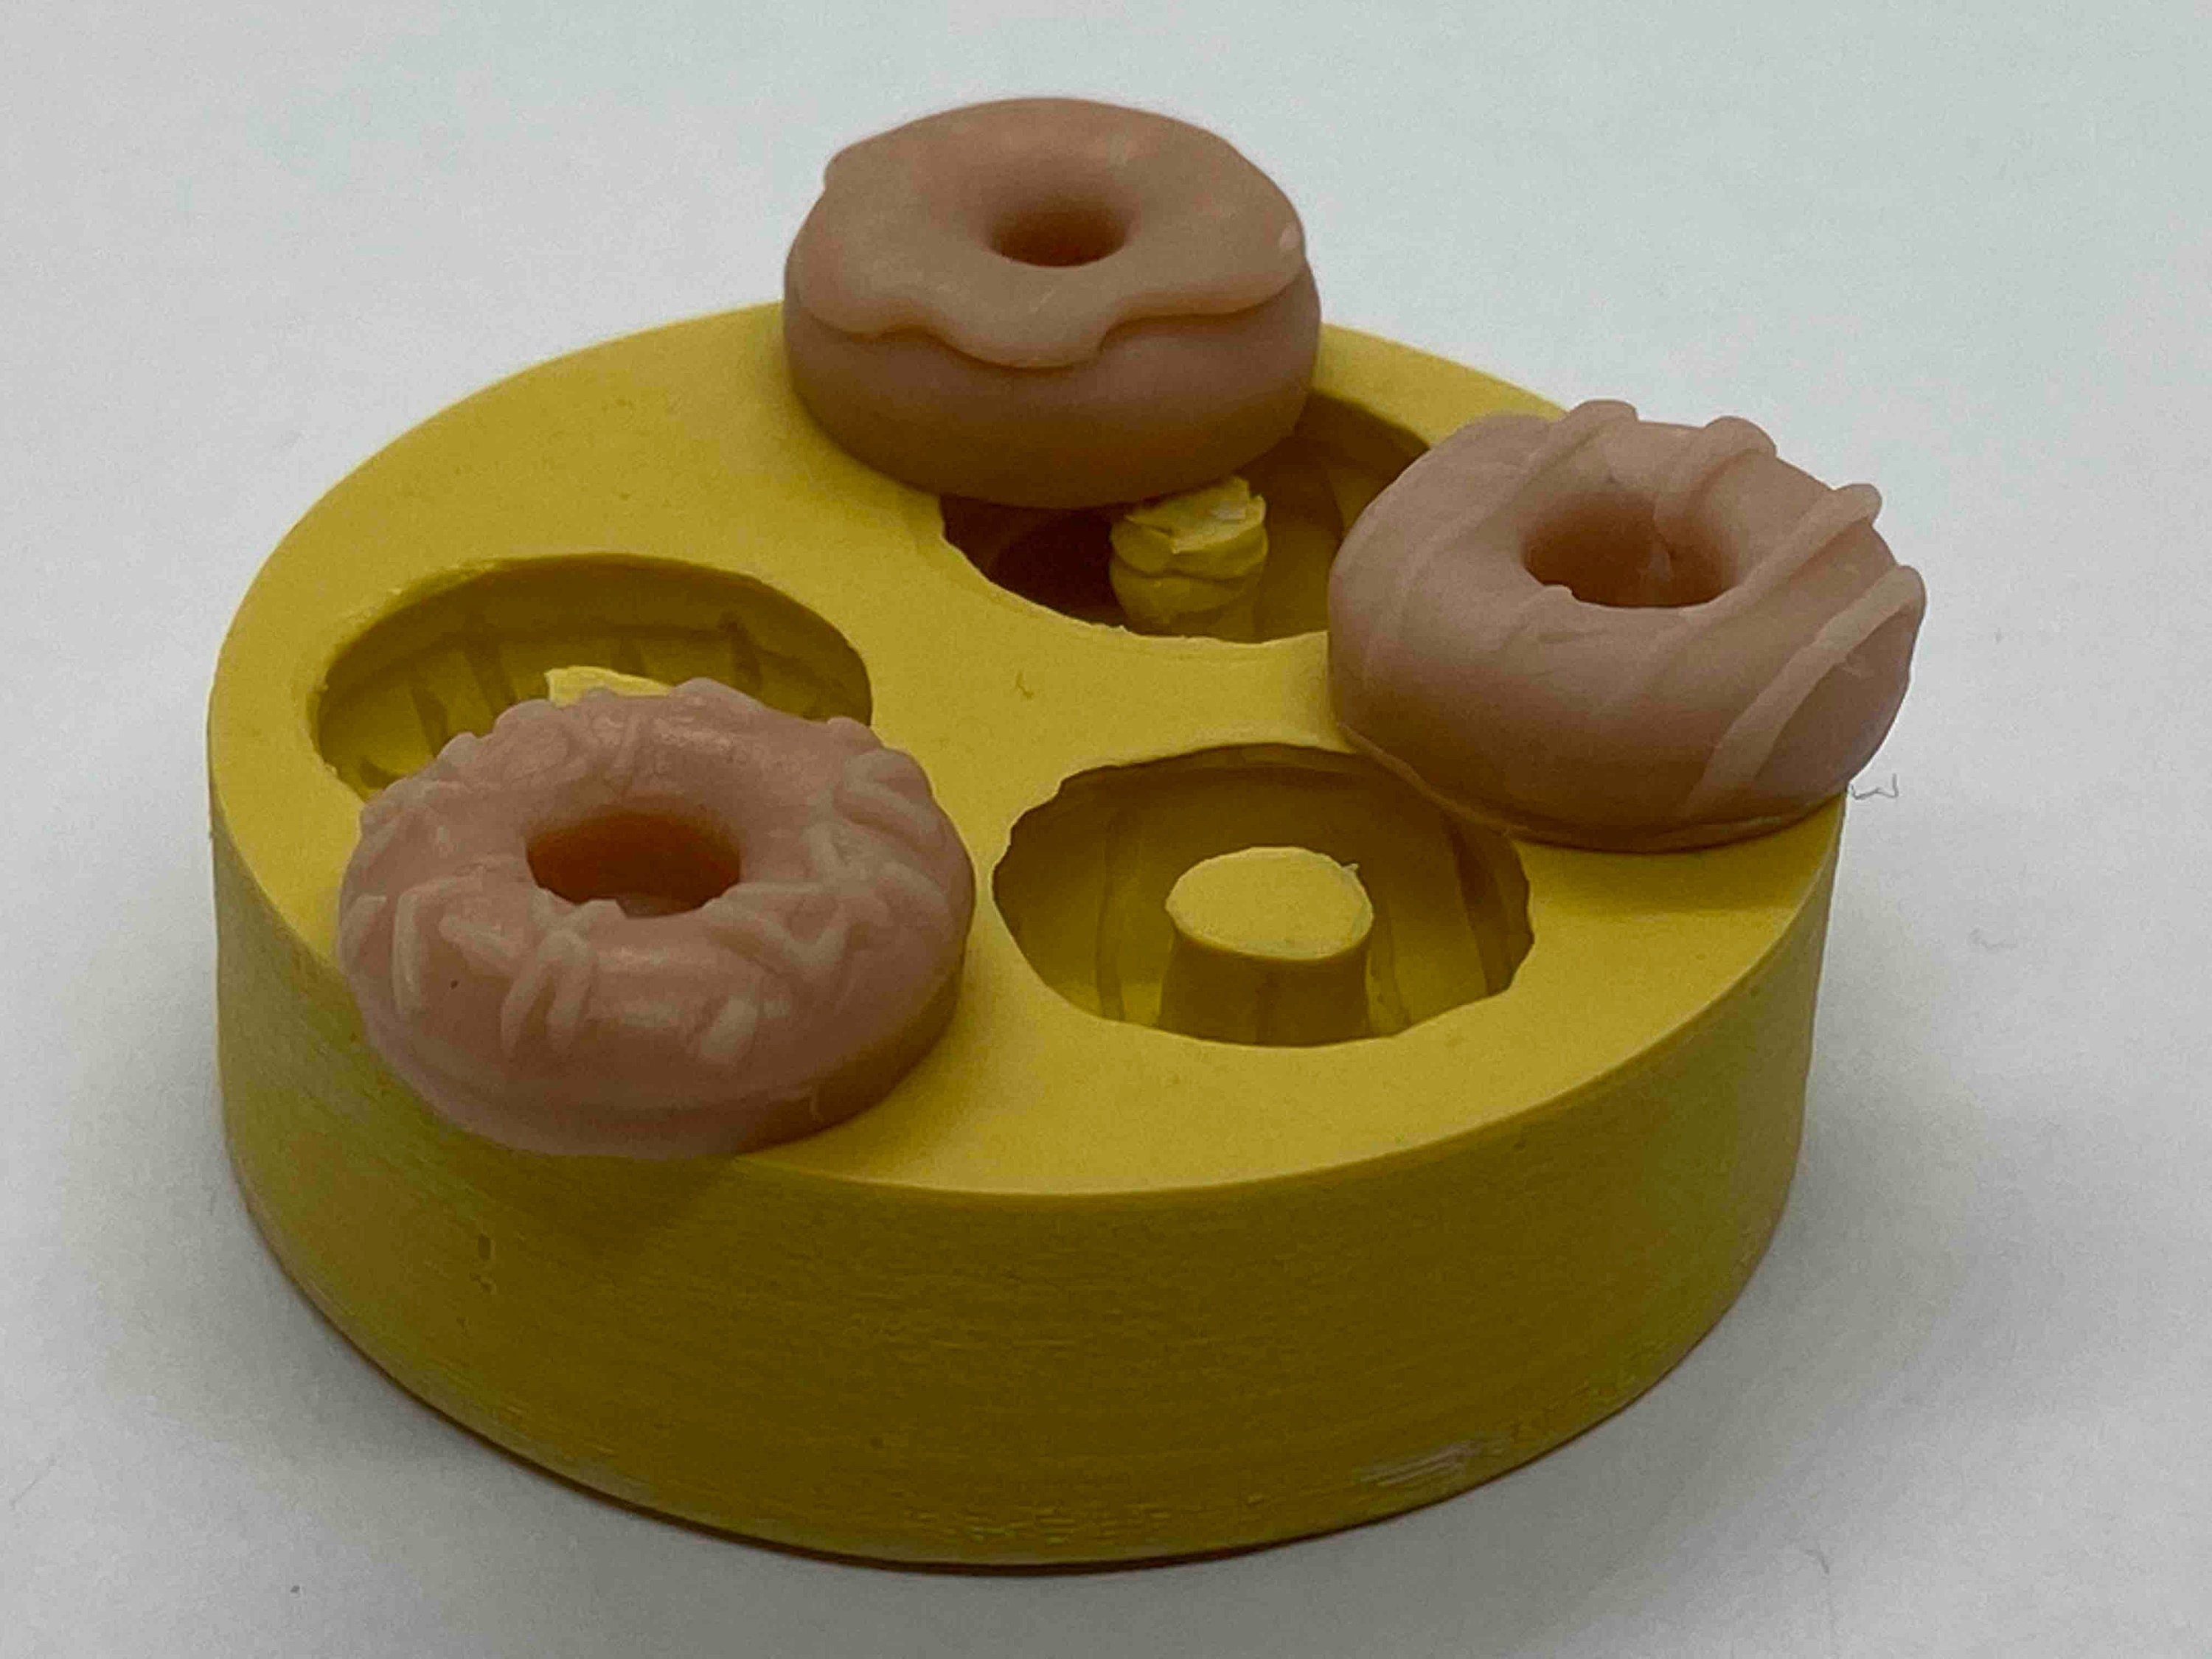 Zhaghmin Mini Donut Resin Mold 4 Companys Flower Silicone Cake Mould 4 Companys Flower Silicone Cake Mould Alien Candy Small Metal Pan Stainless Steel